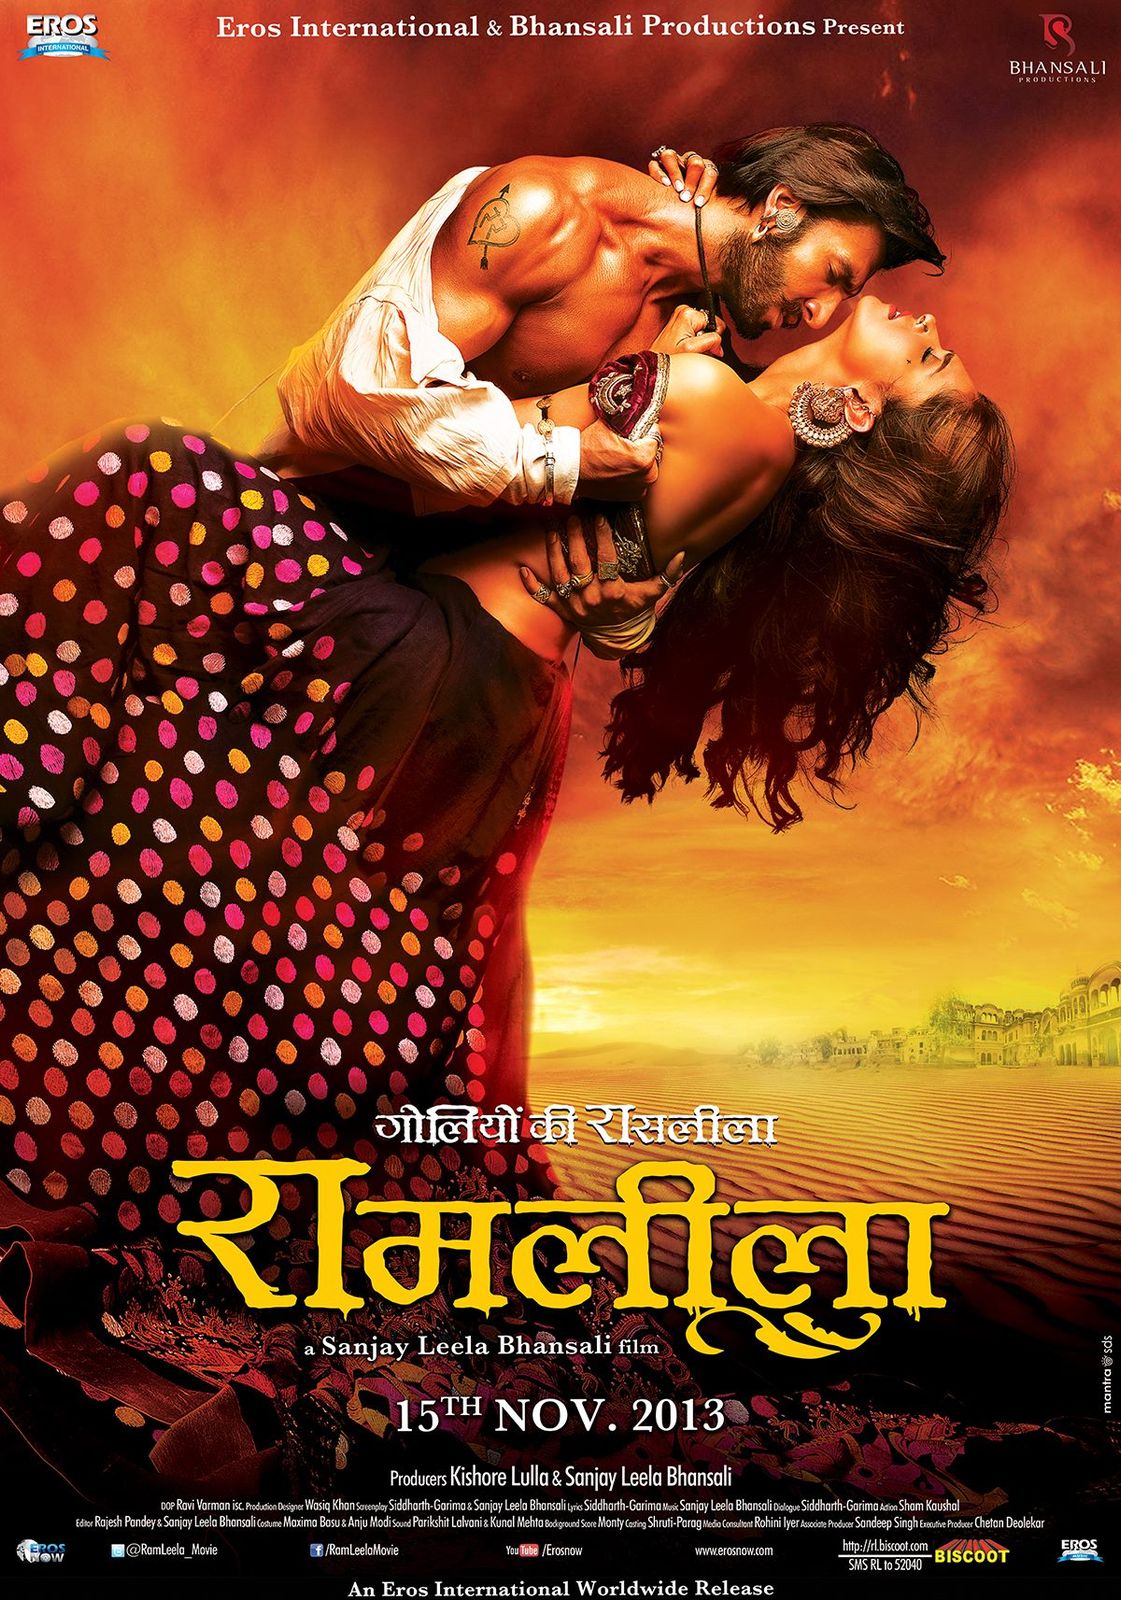 Ram-Leela’s release on hold by Delhi court, title conflicts with story